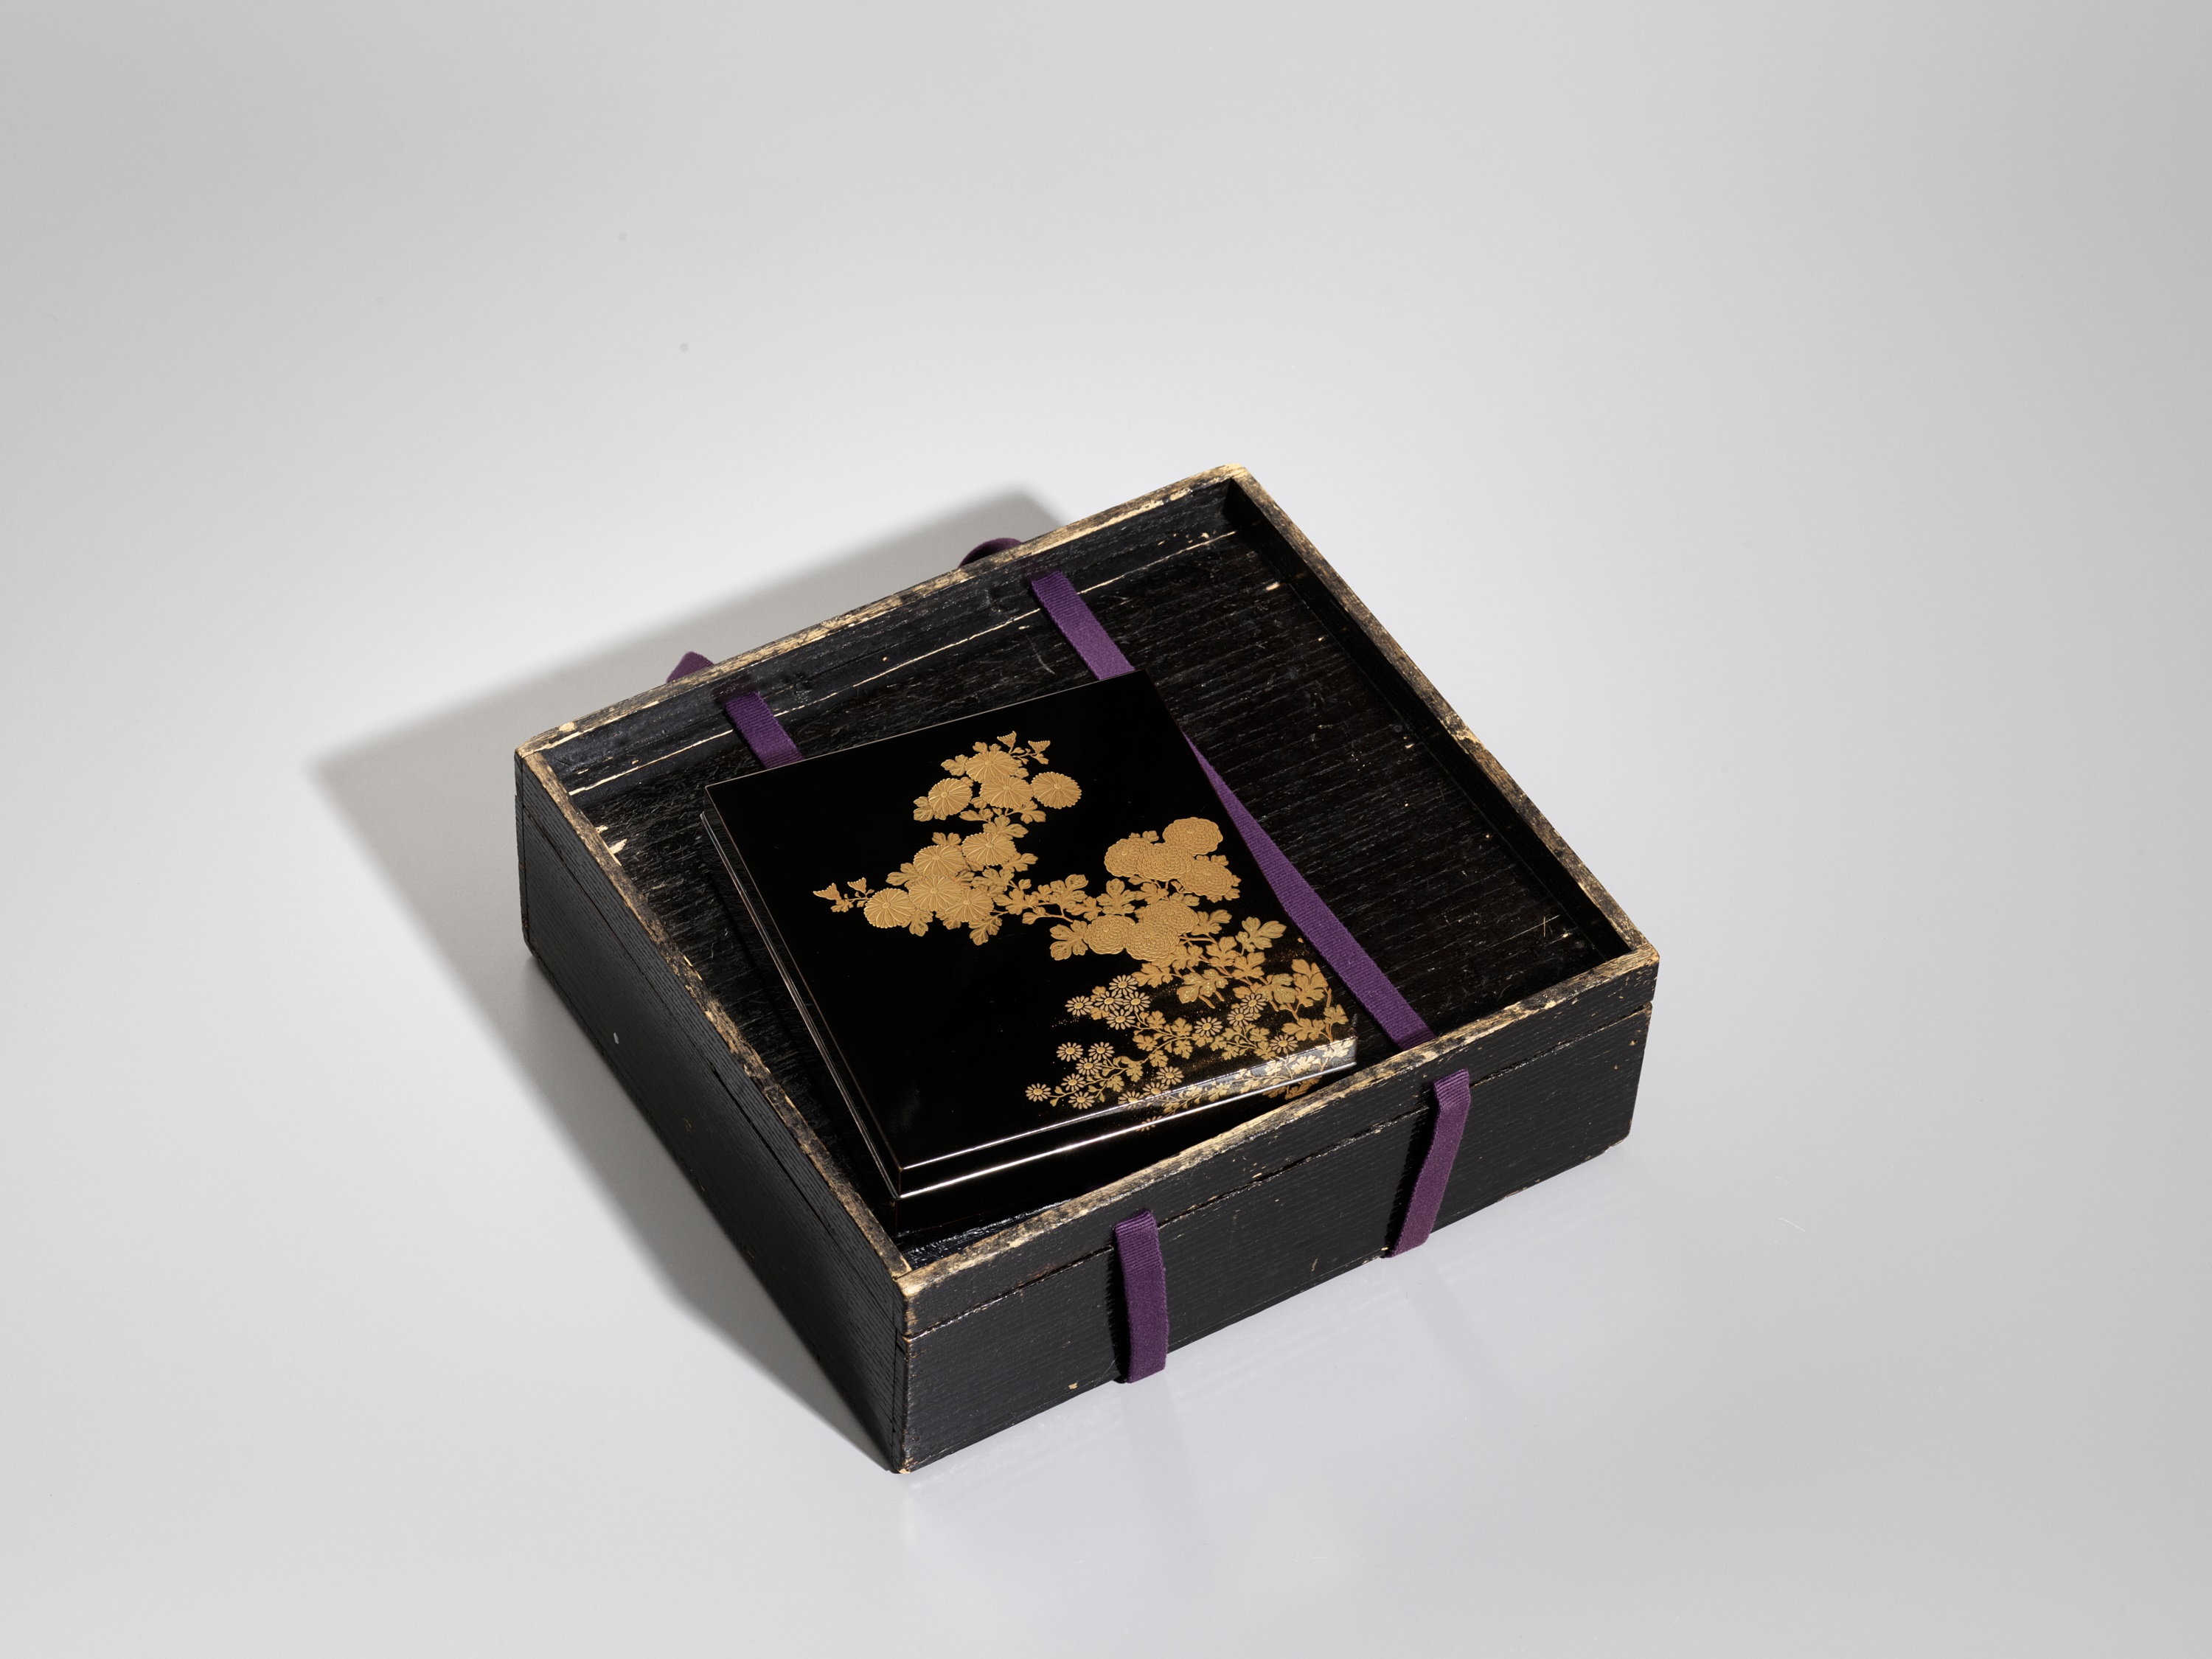 A FINE LACQUER SUZURIBAKO AND COVER WITH CHRYSANTHEMUMS - Image 8 of 11